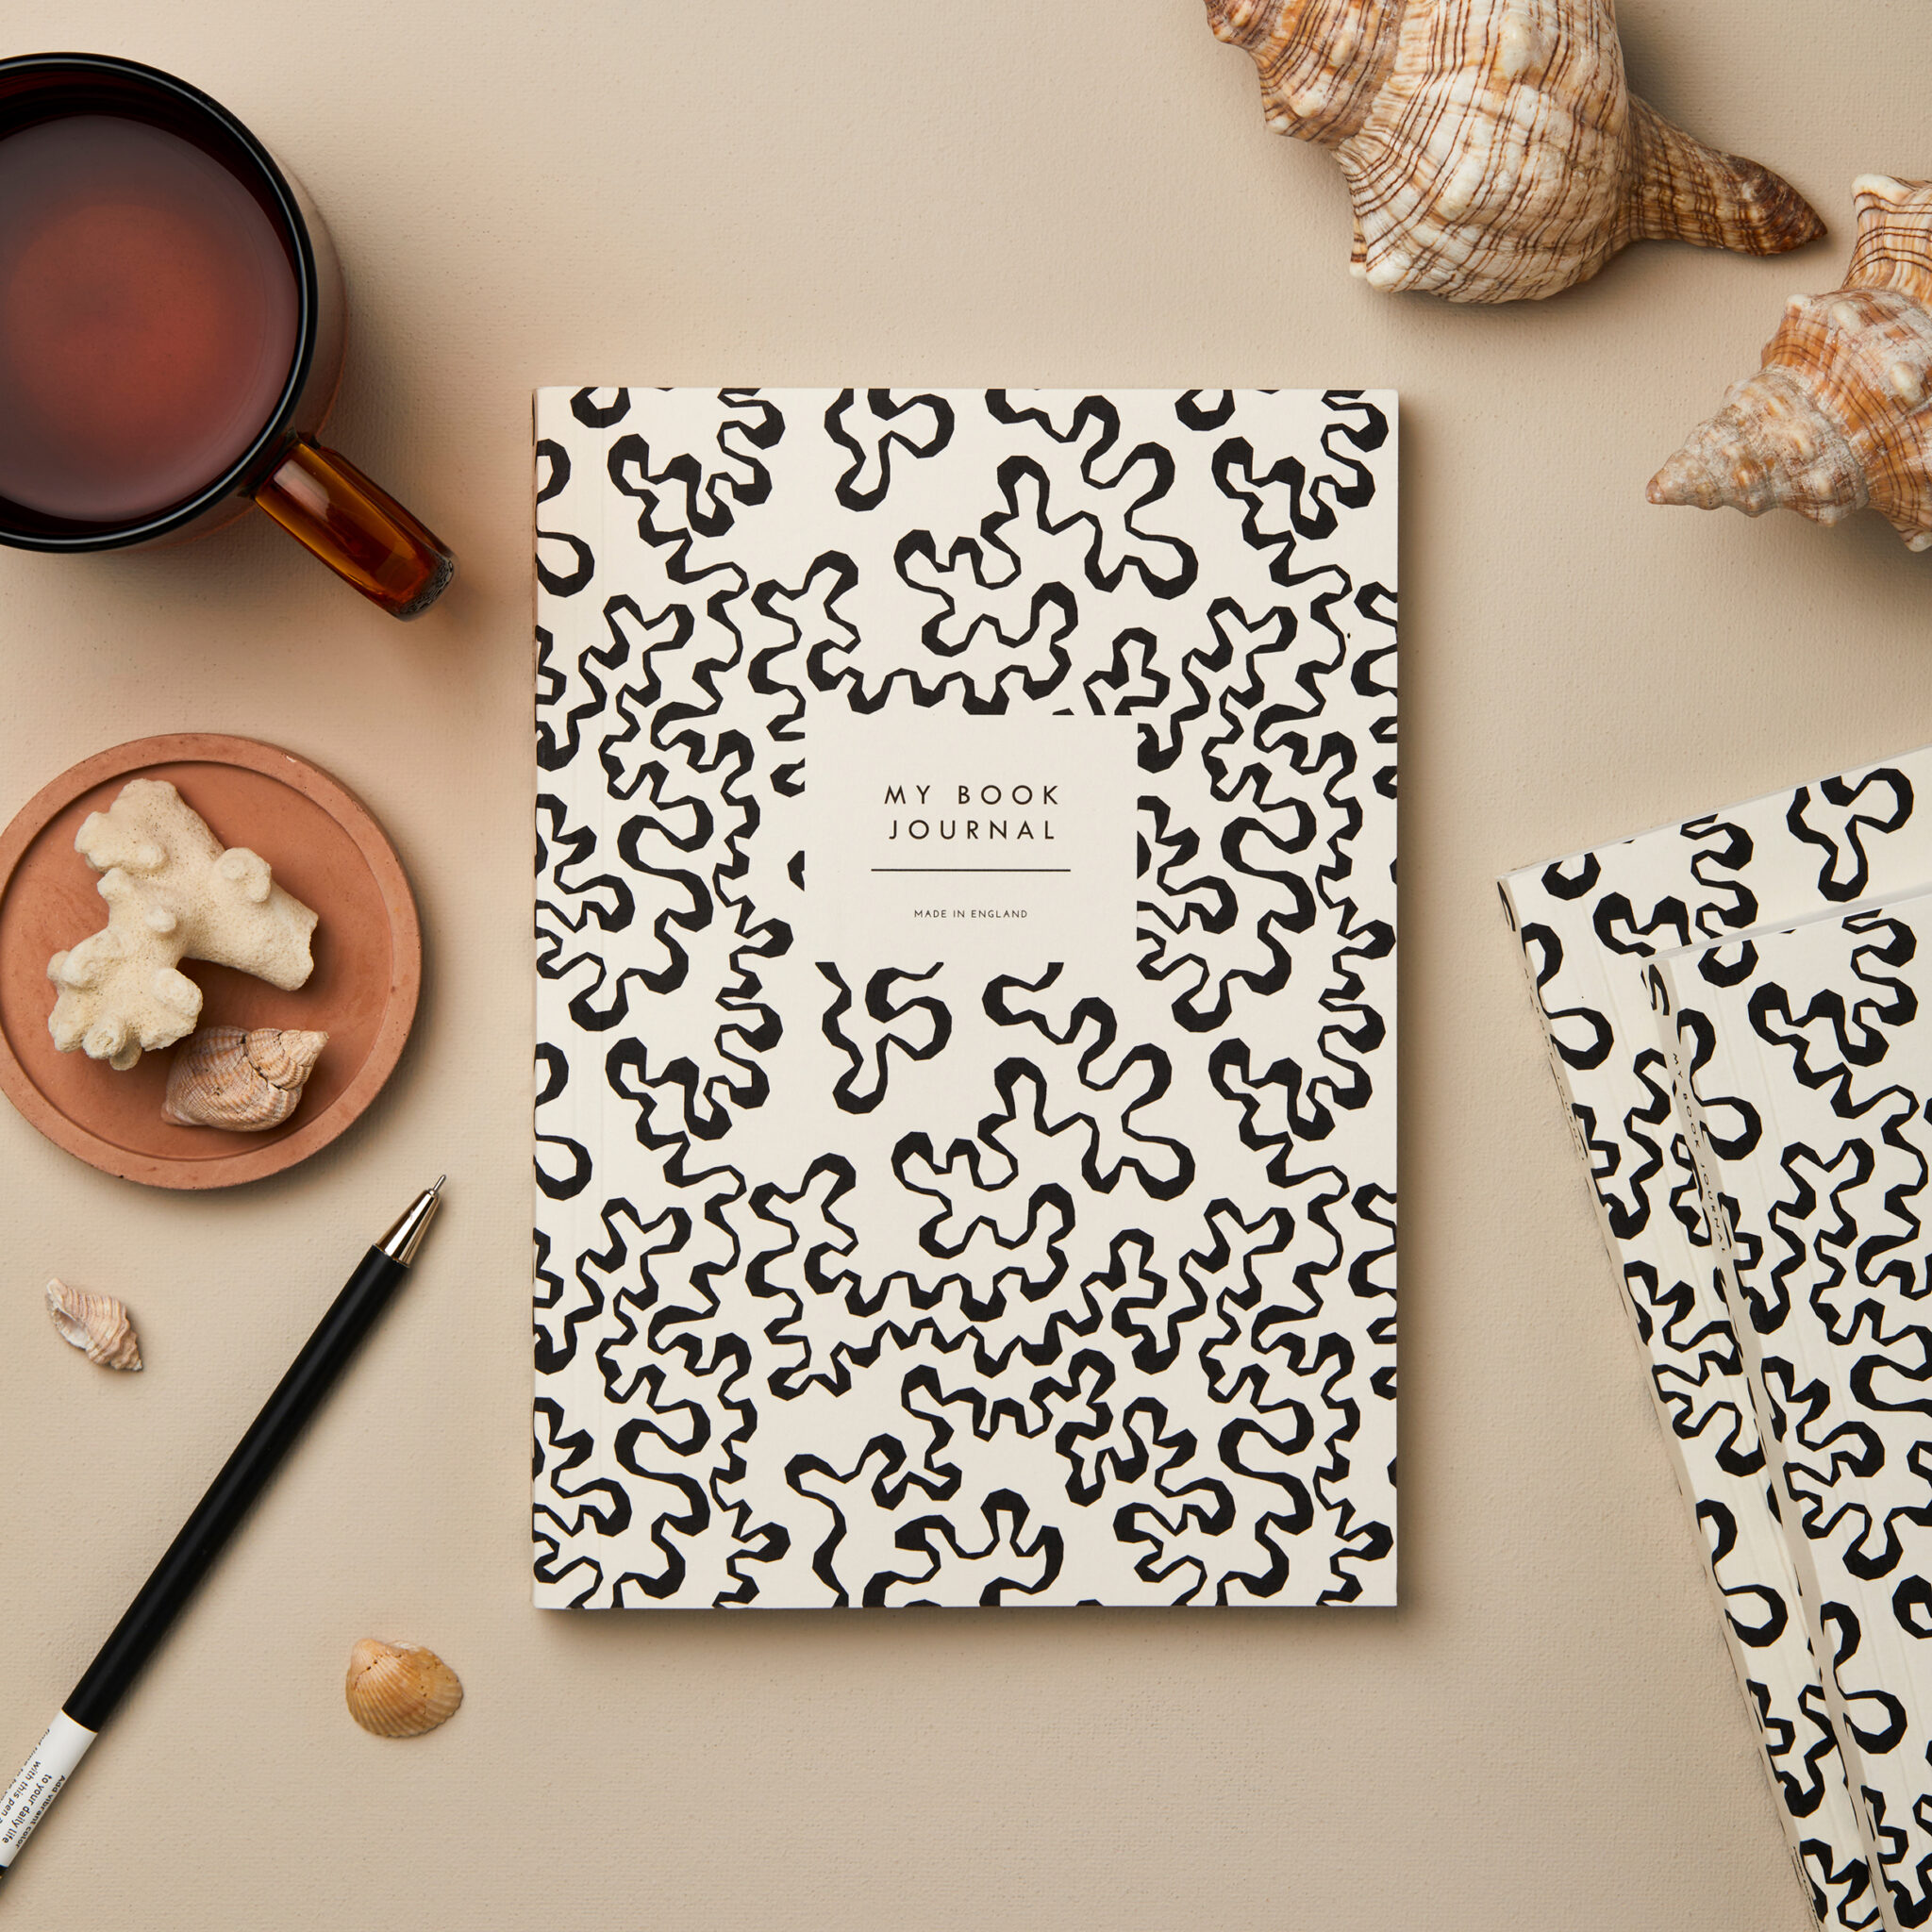 beautiful book journal stylised coral design black and white atyled stories_sq